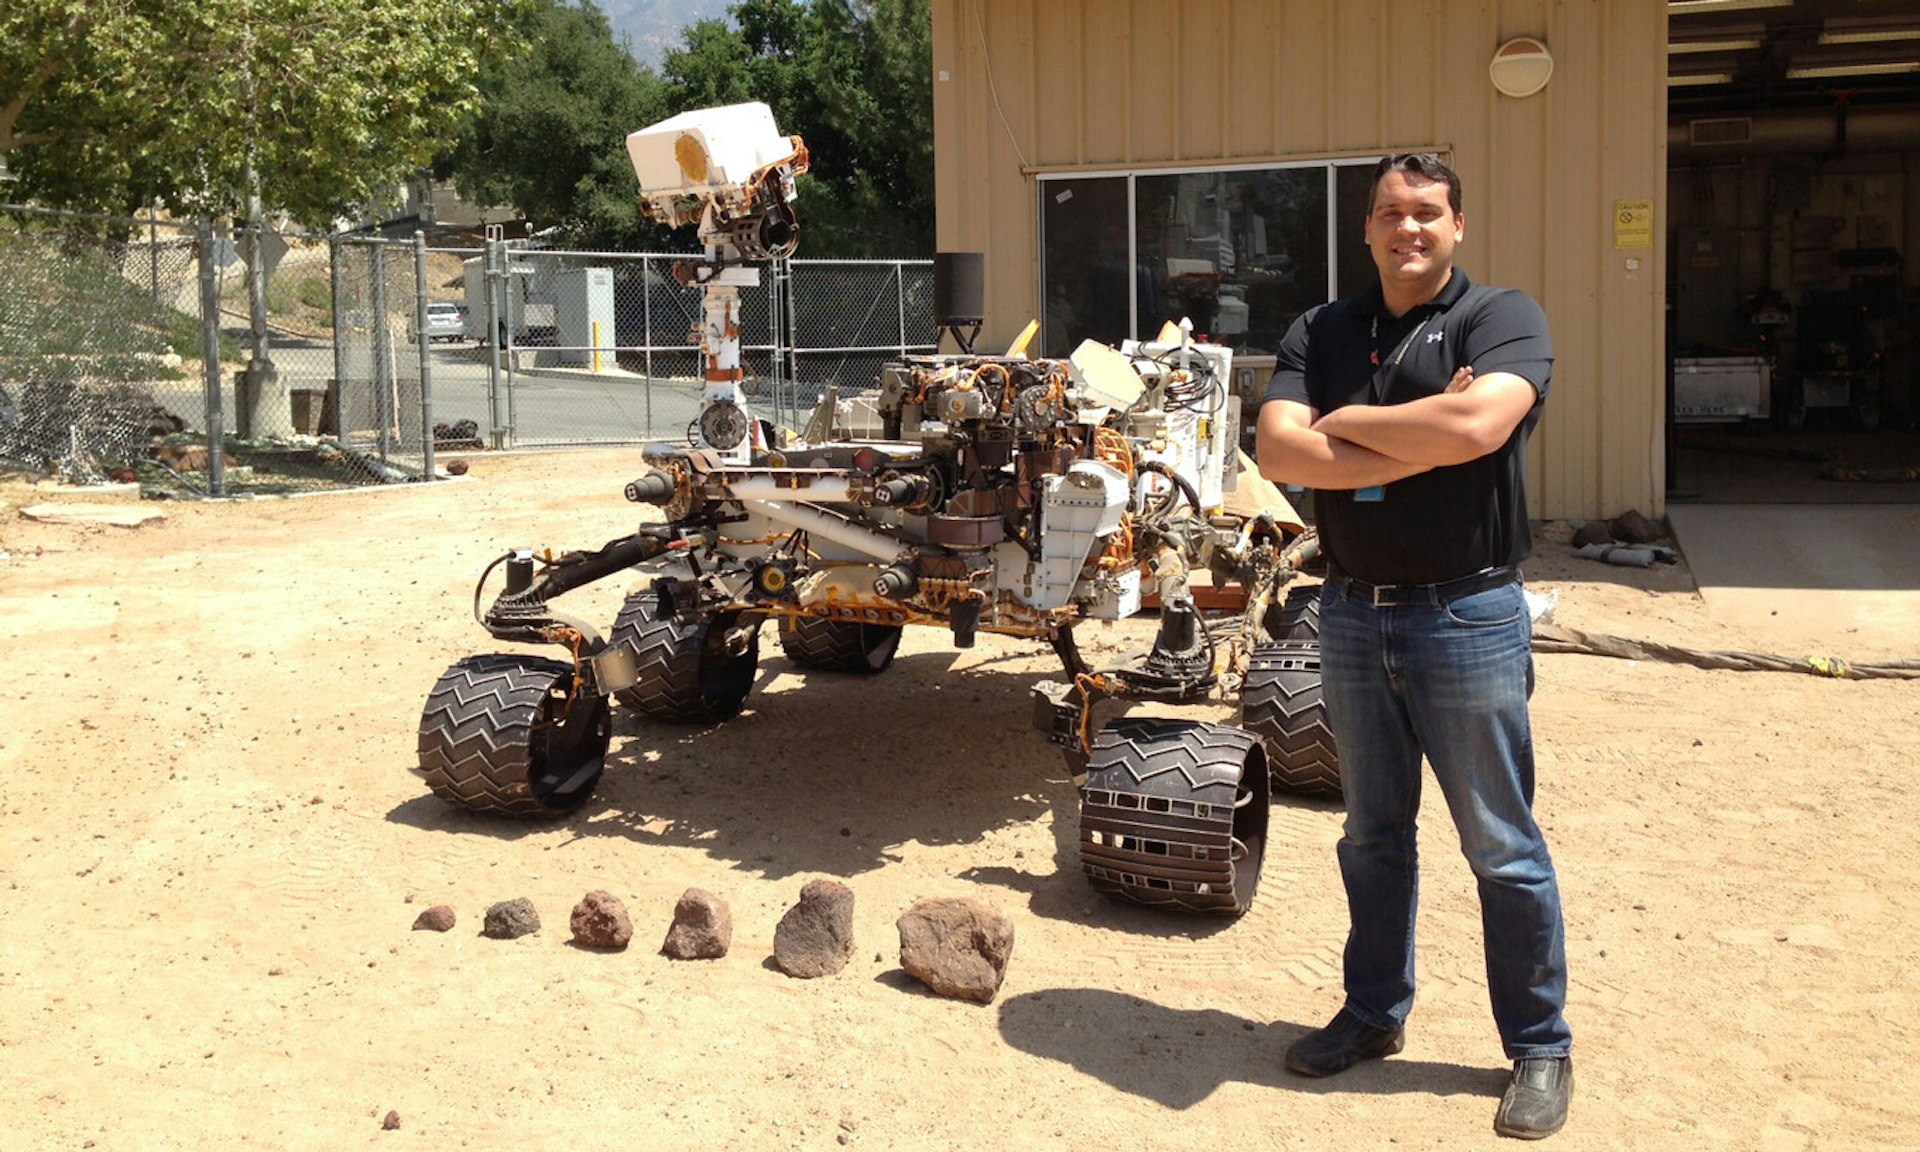 Olivier Toupet standing next to the curiosity rover